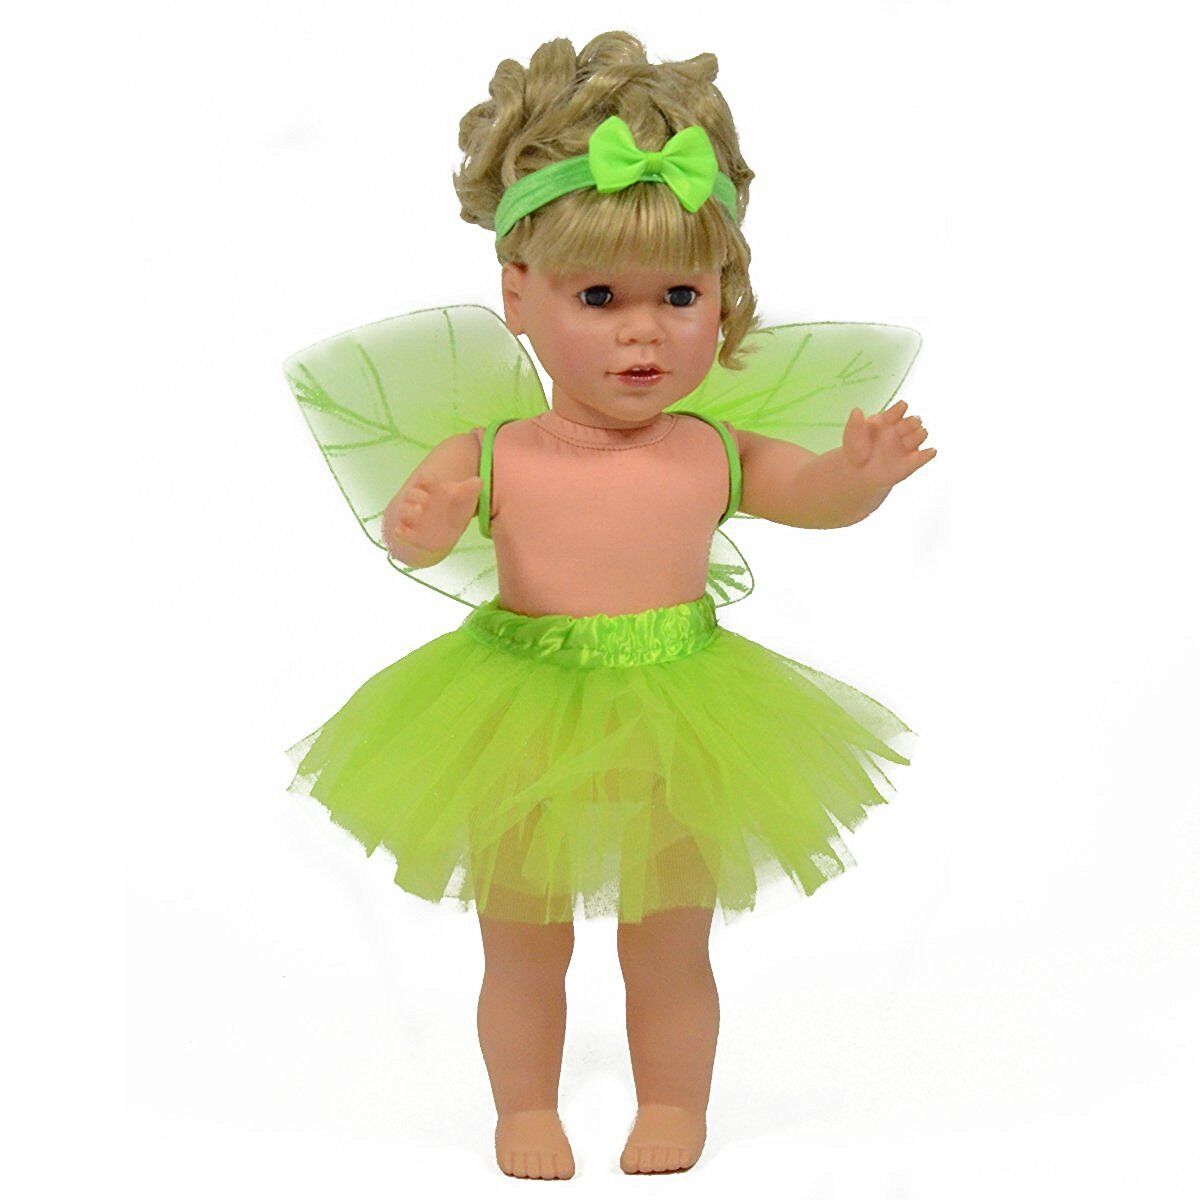 Green Fairy/Pixie Dress up Costume for Girls - Kids Matching Pretend Play Outfit The New York Doll Collection - фотография #5